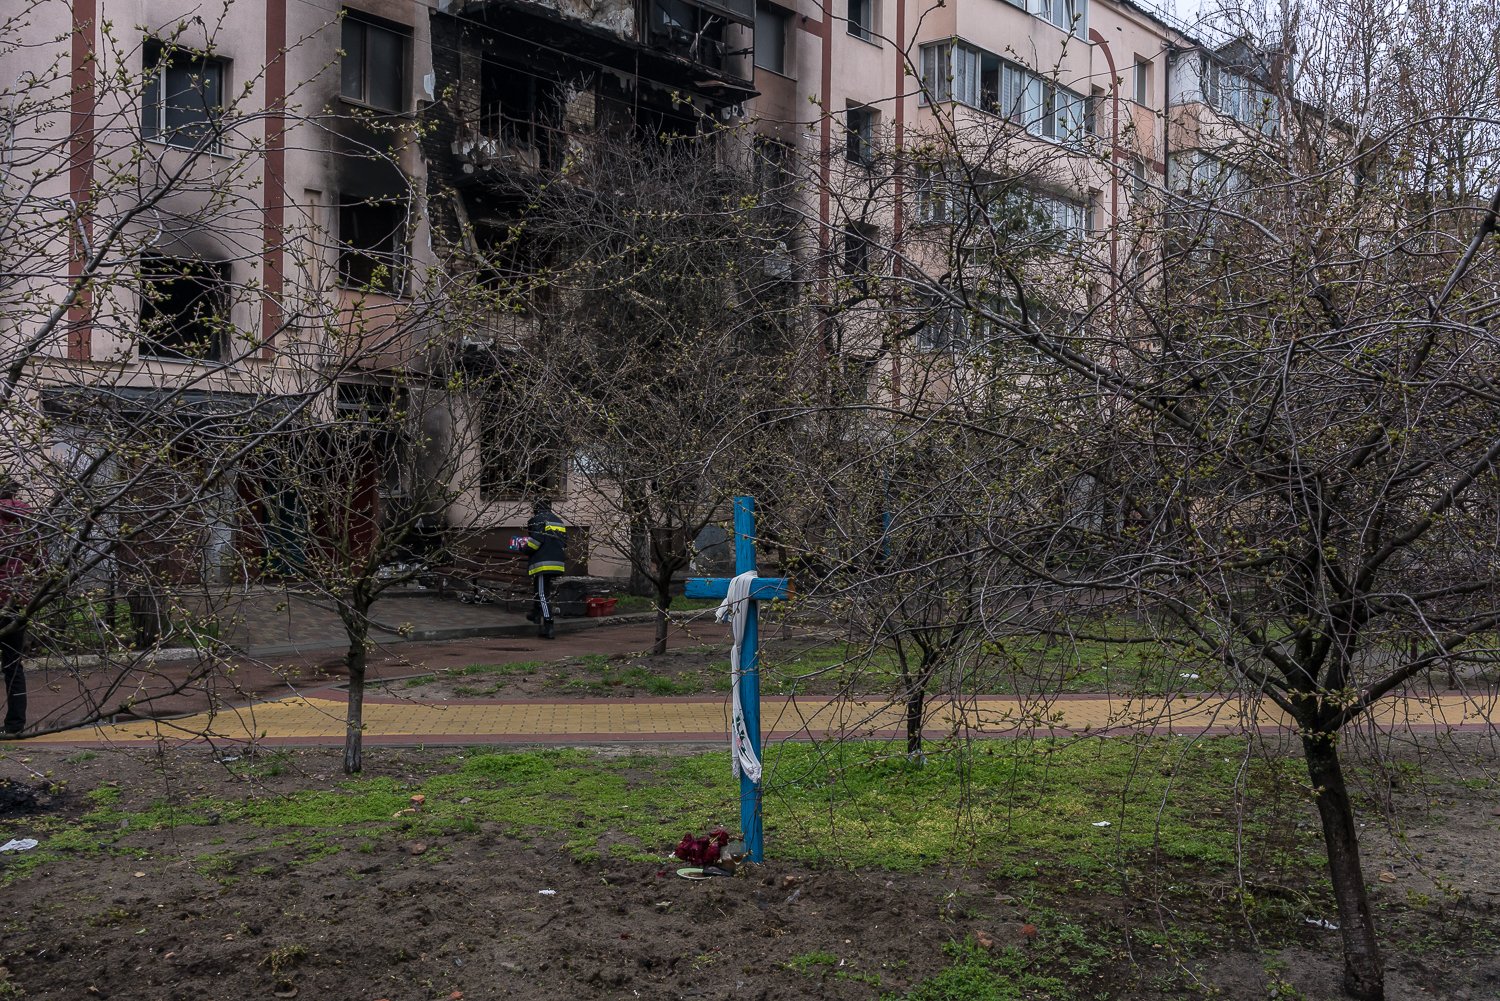  The site where Inna Leschenko, 45, who was killed by shelling in the city on March 19, was buried in a makeshift grave in the courtyard of her apartment building, on Friday, April 22, 2022 in Bucha, Ukraine. 